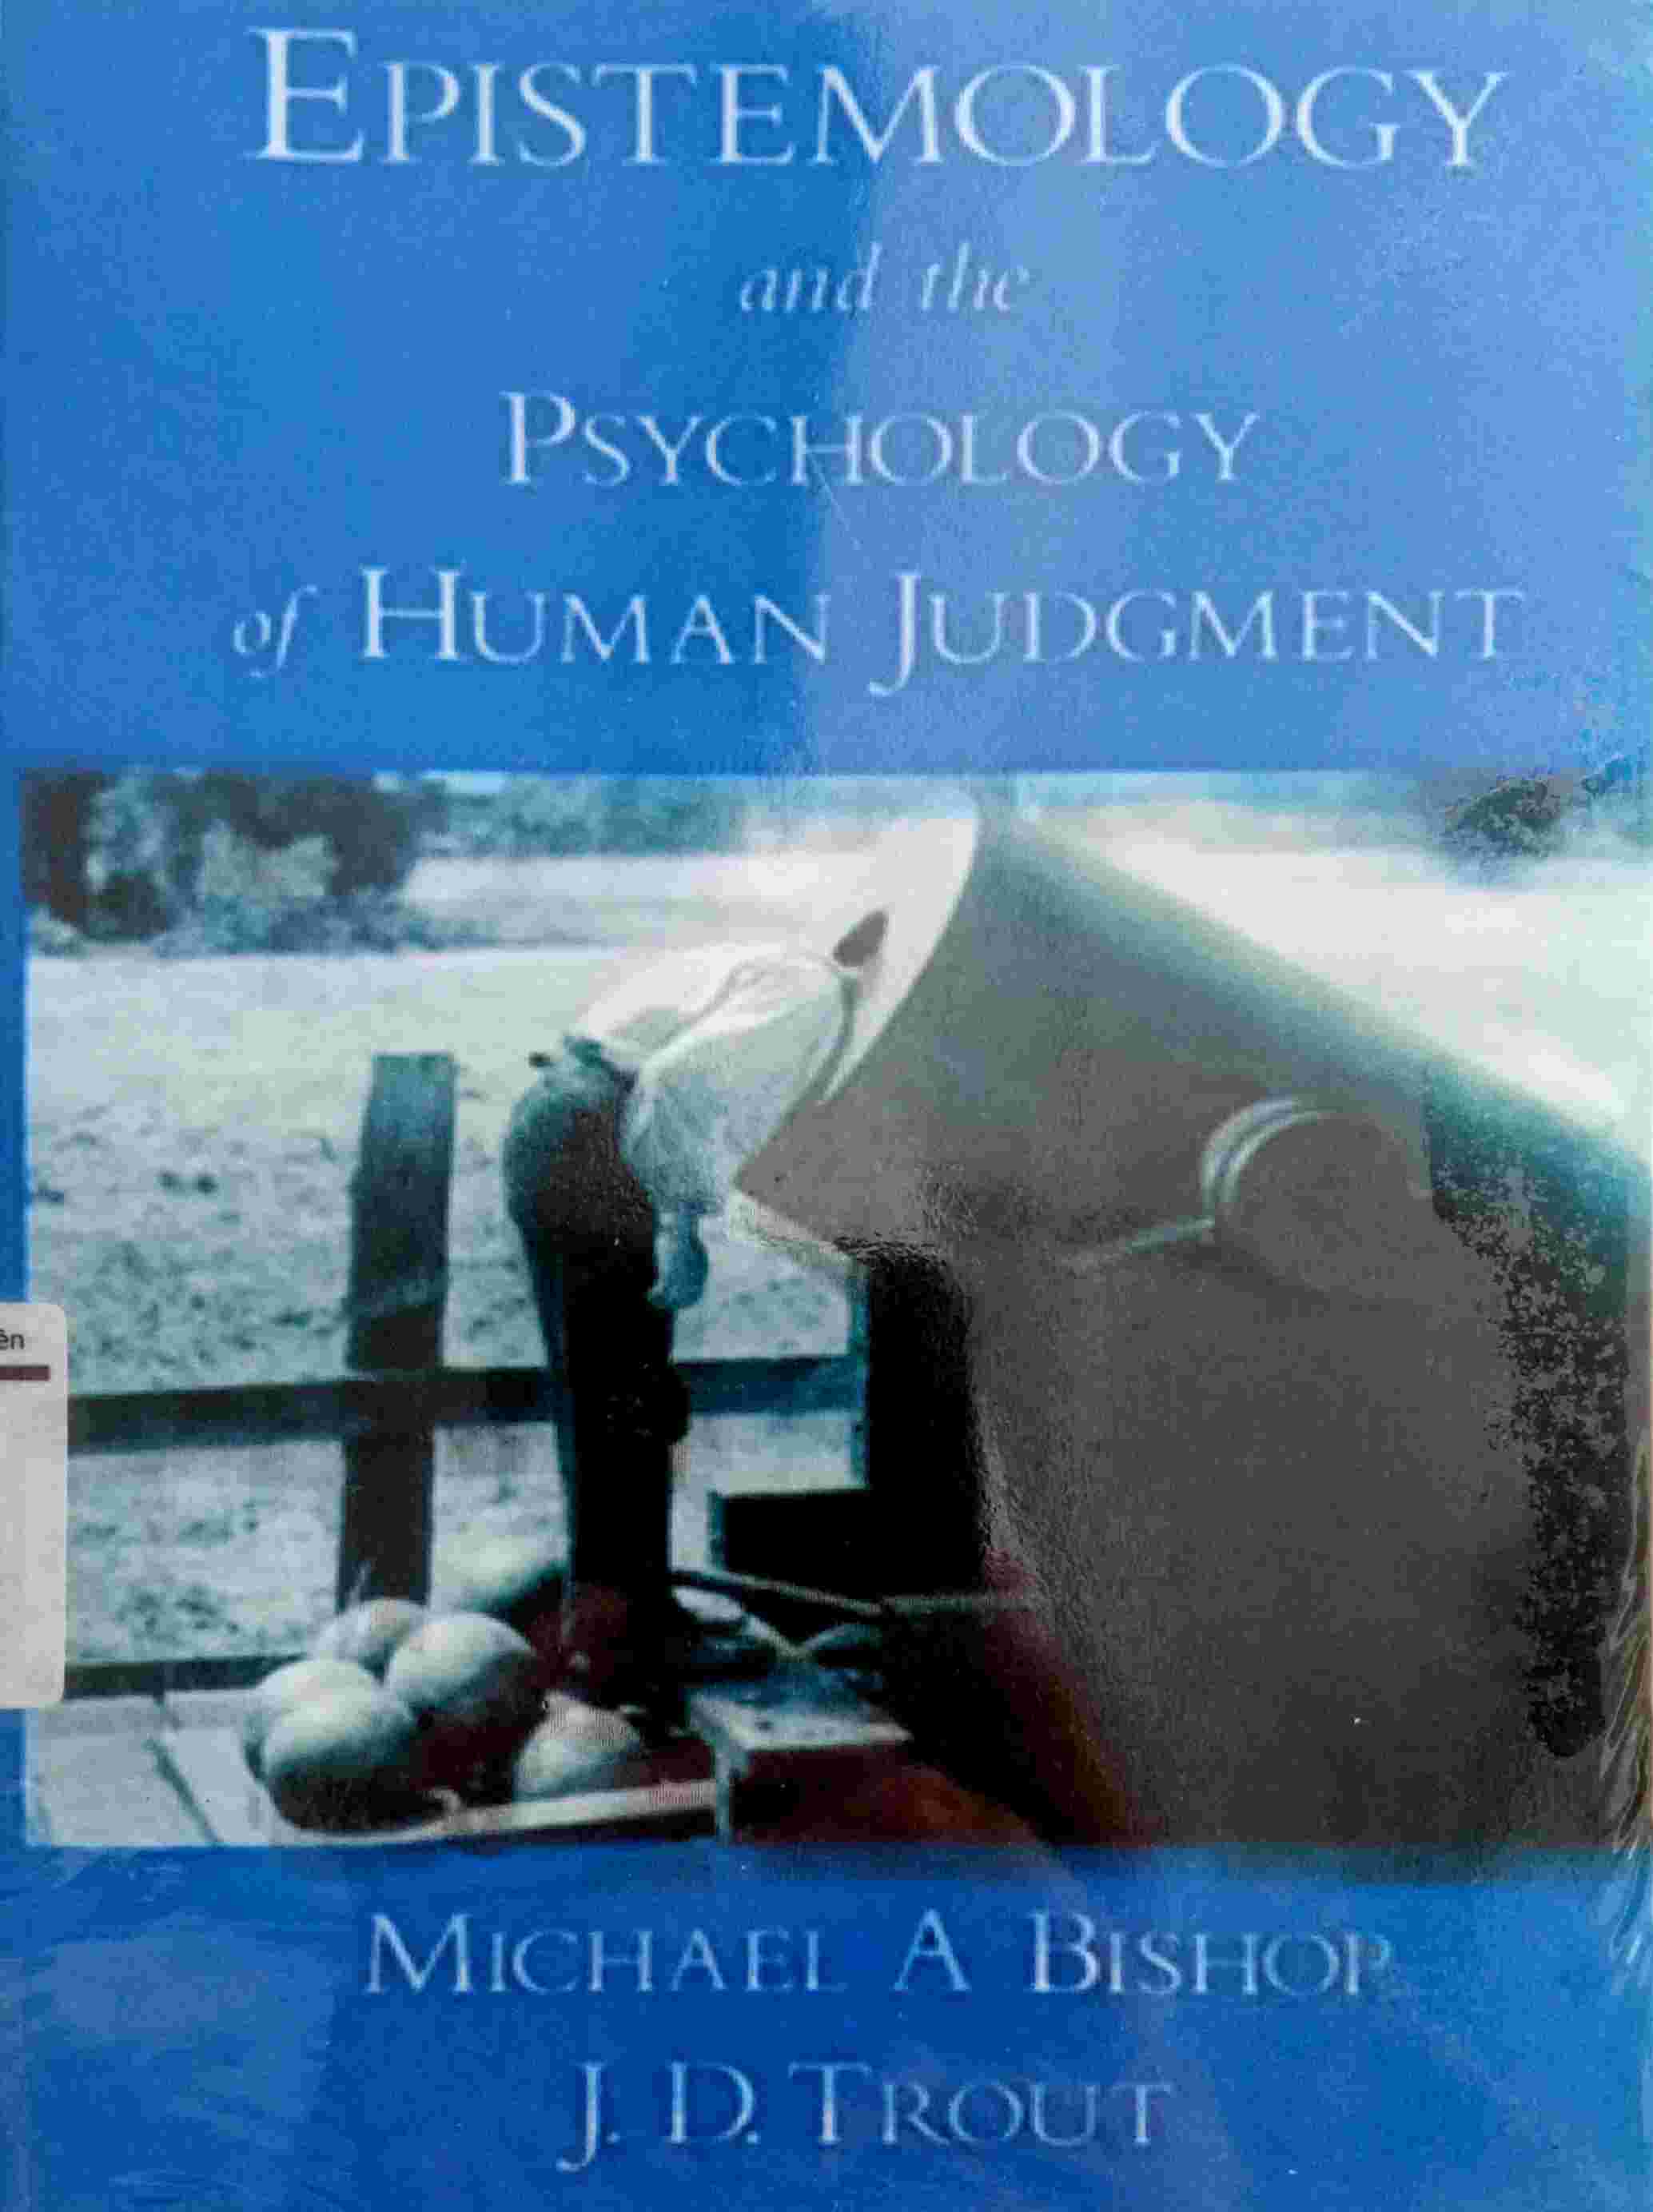 EPISTEMOLOGY AND THE PSYCHOLOGY OF HUMAN JUDGMENT